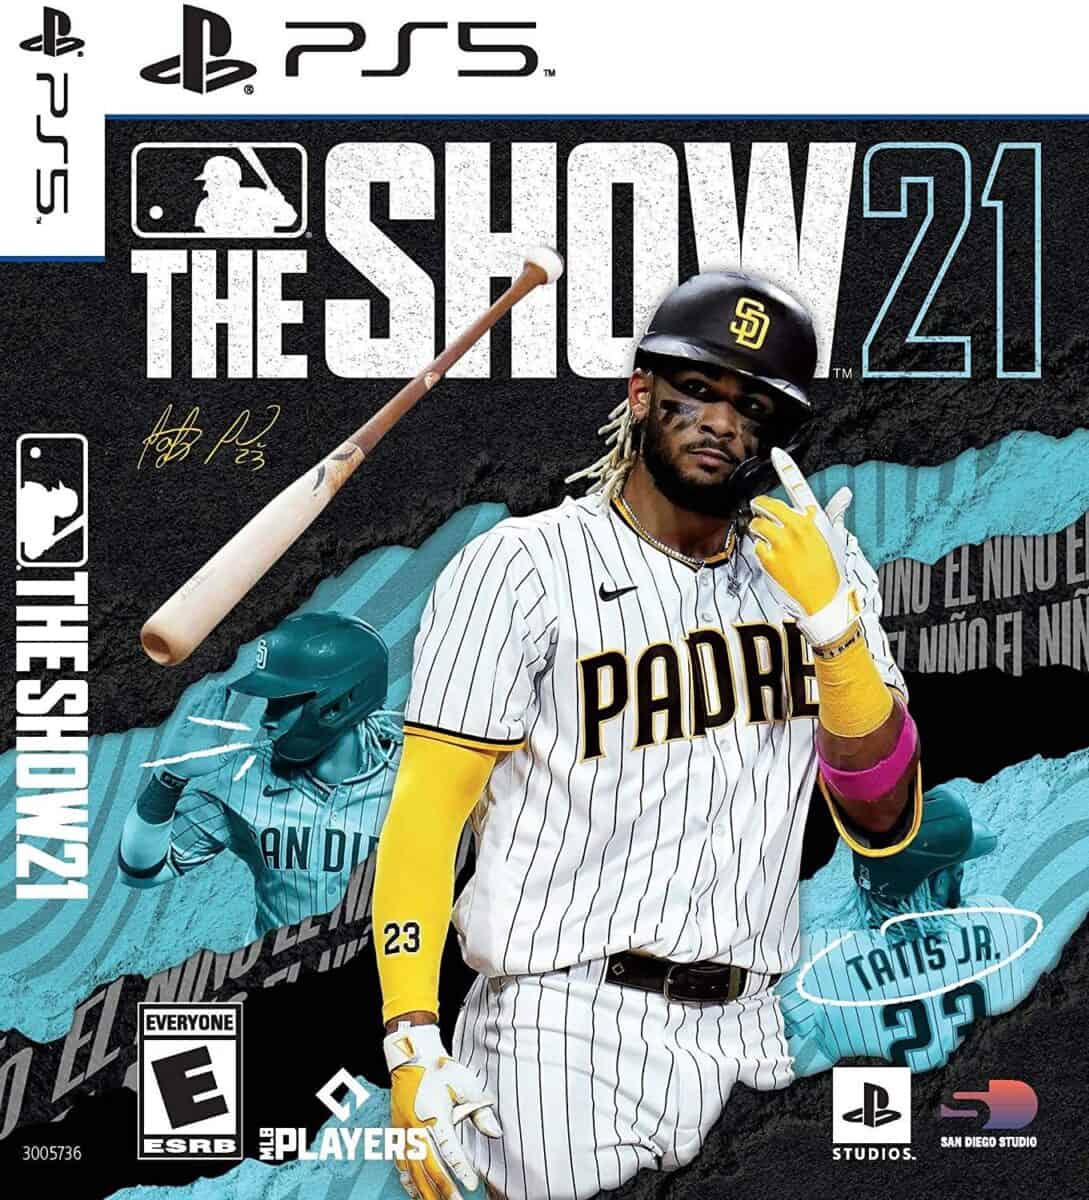 Front cover of the MLB The Show 21 PlayStation sports game